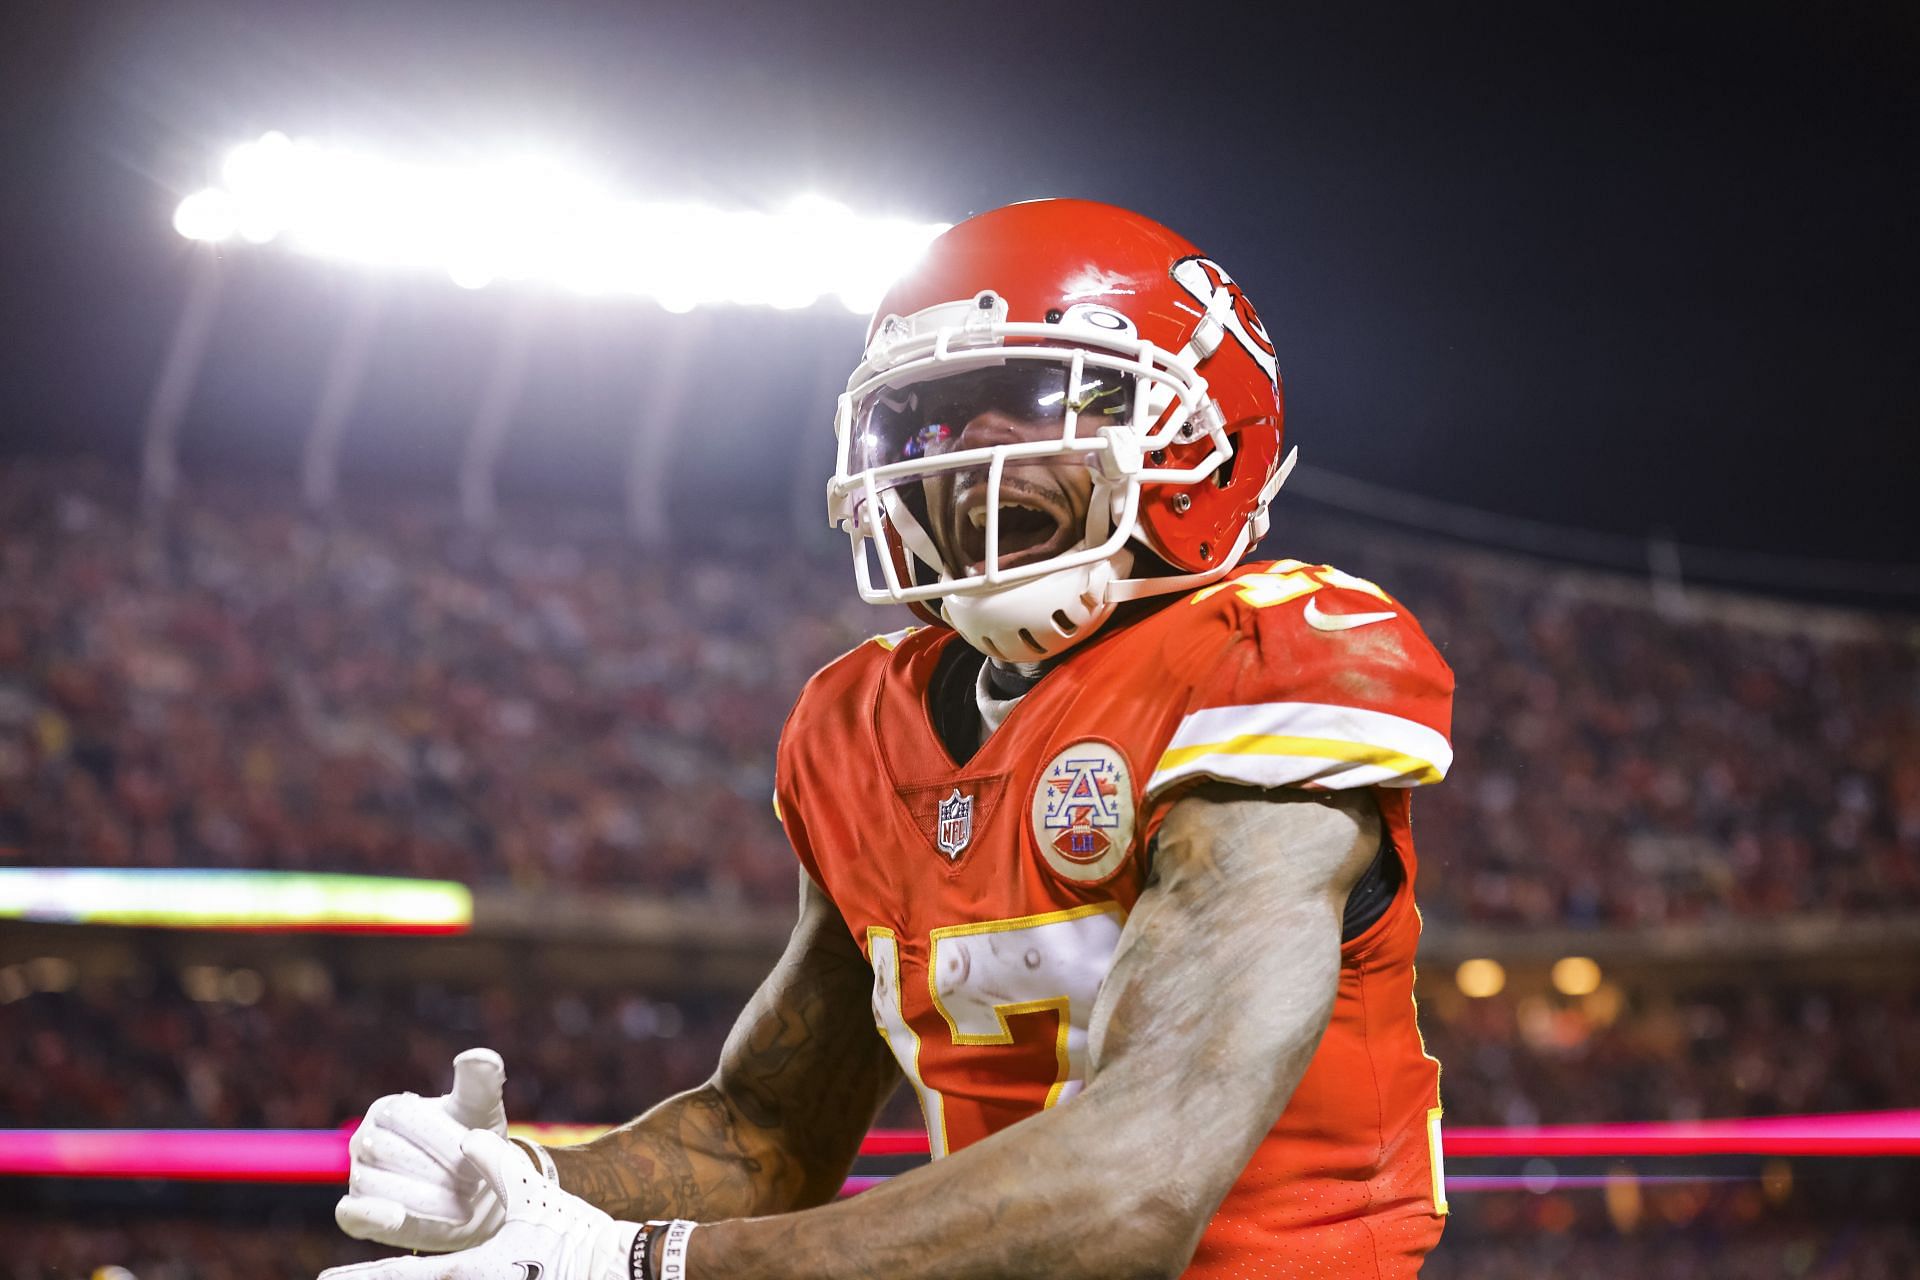 Hardman was crucial for the Chiefs over the years.